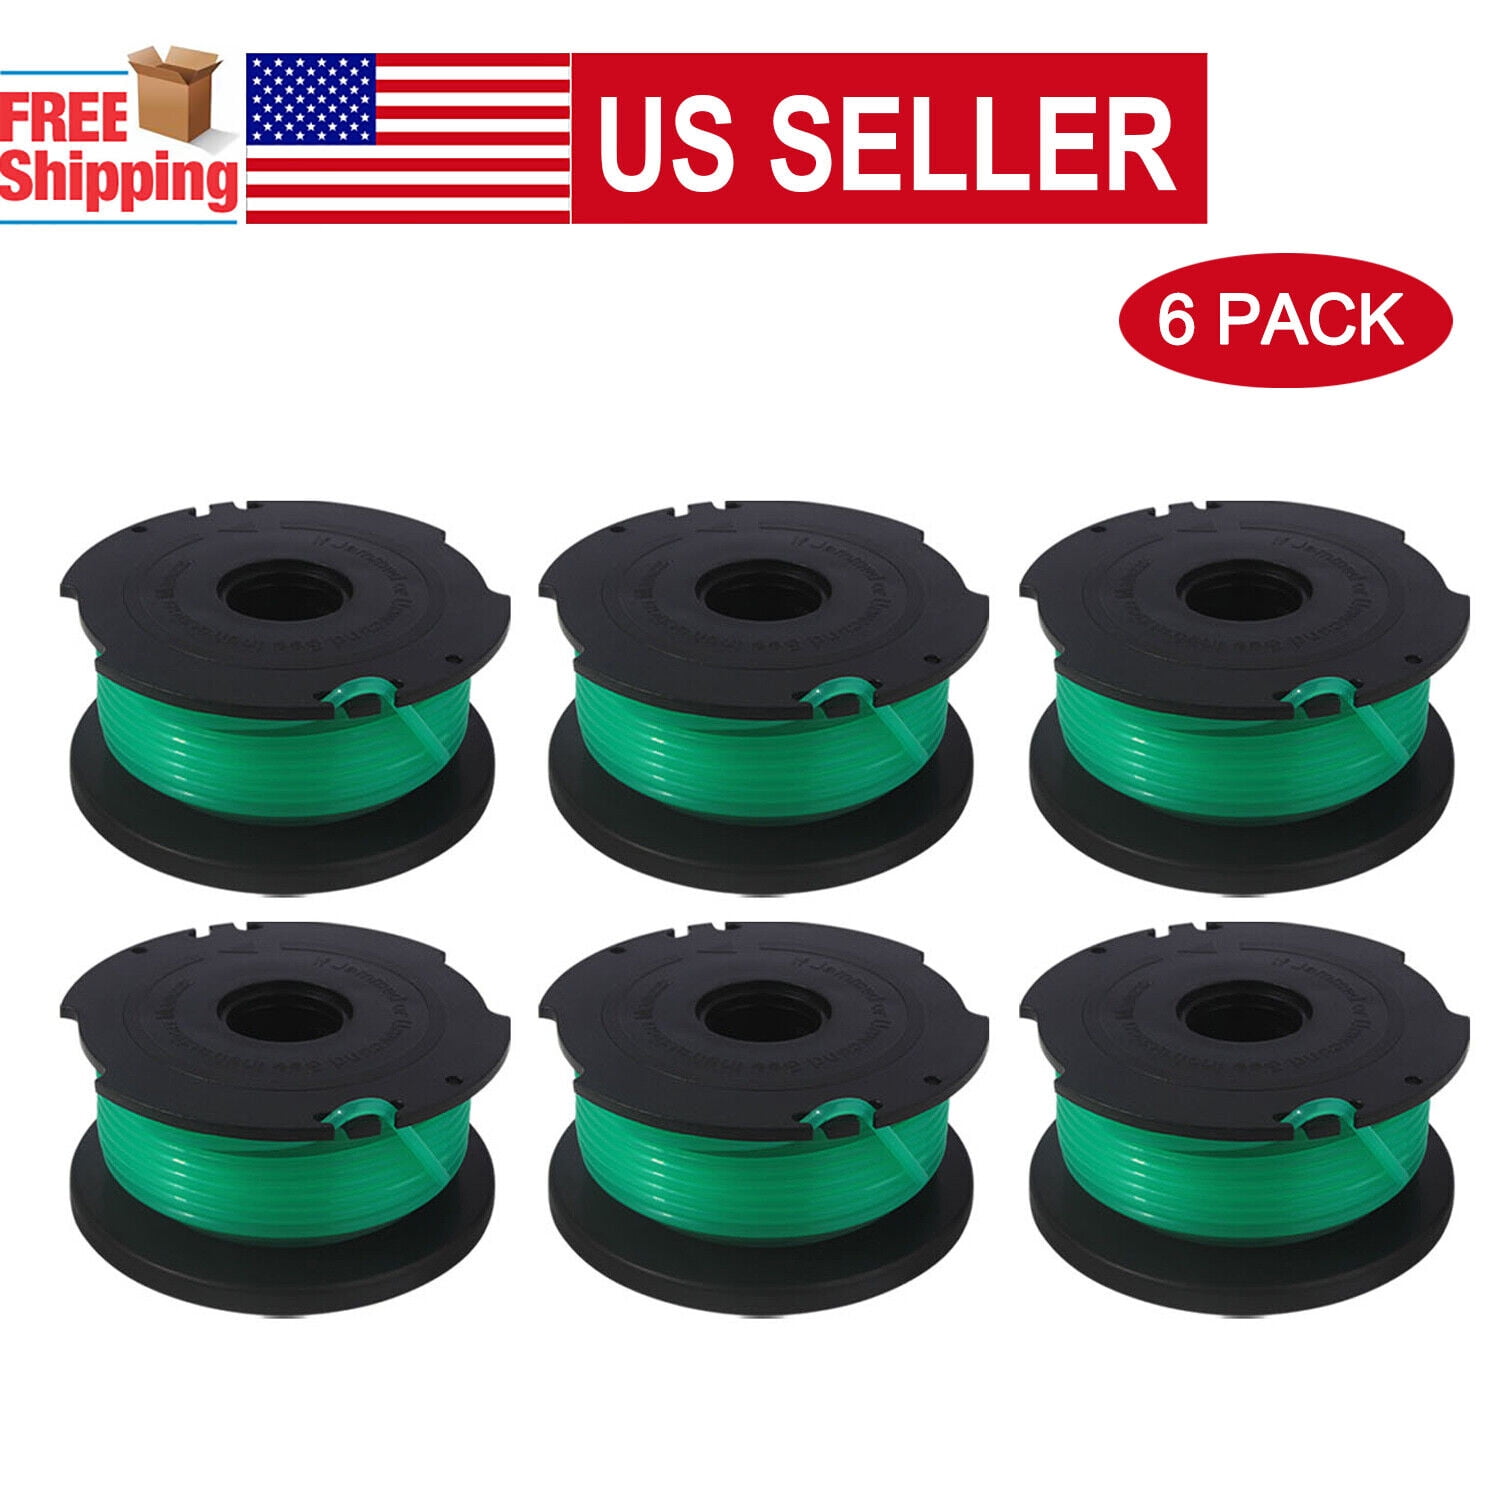 Eyoloty SF-080 String Trimmer Spool Replacement for Black and Decker  SF-080-BKP GH3000 LST540 GH3000R LST540B Weed Eater 20ft 0.080 Edger  Refills